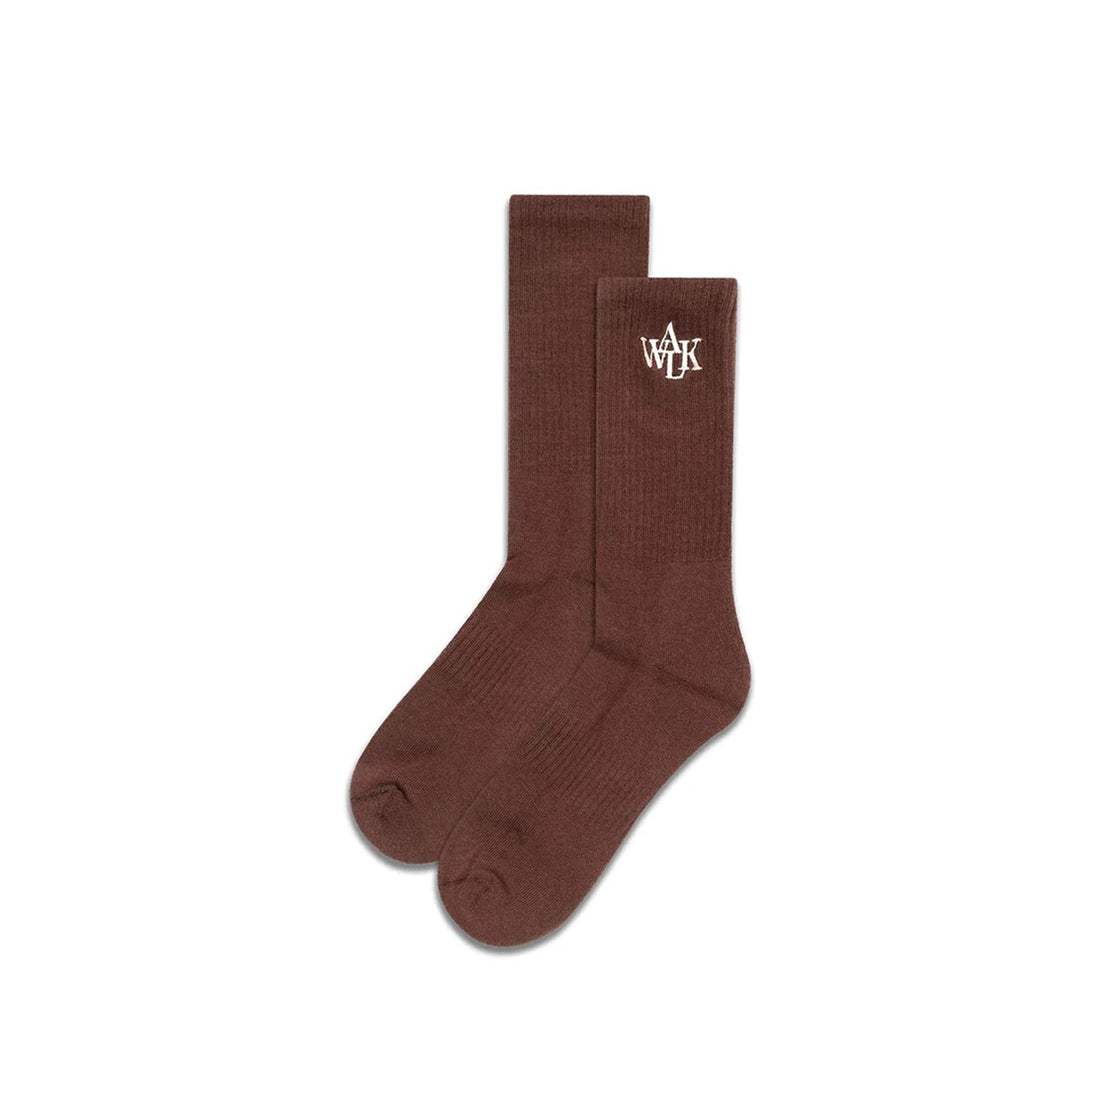 THE BROWN EMBROIDERED SOCKS